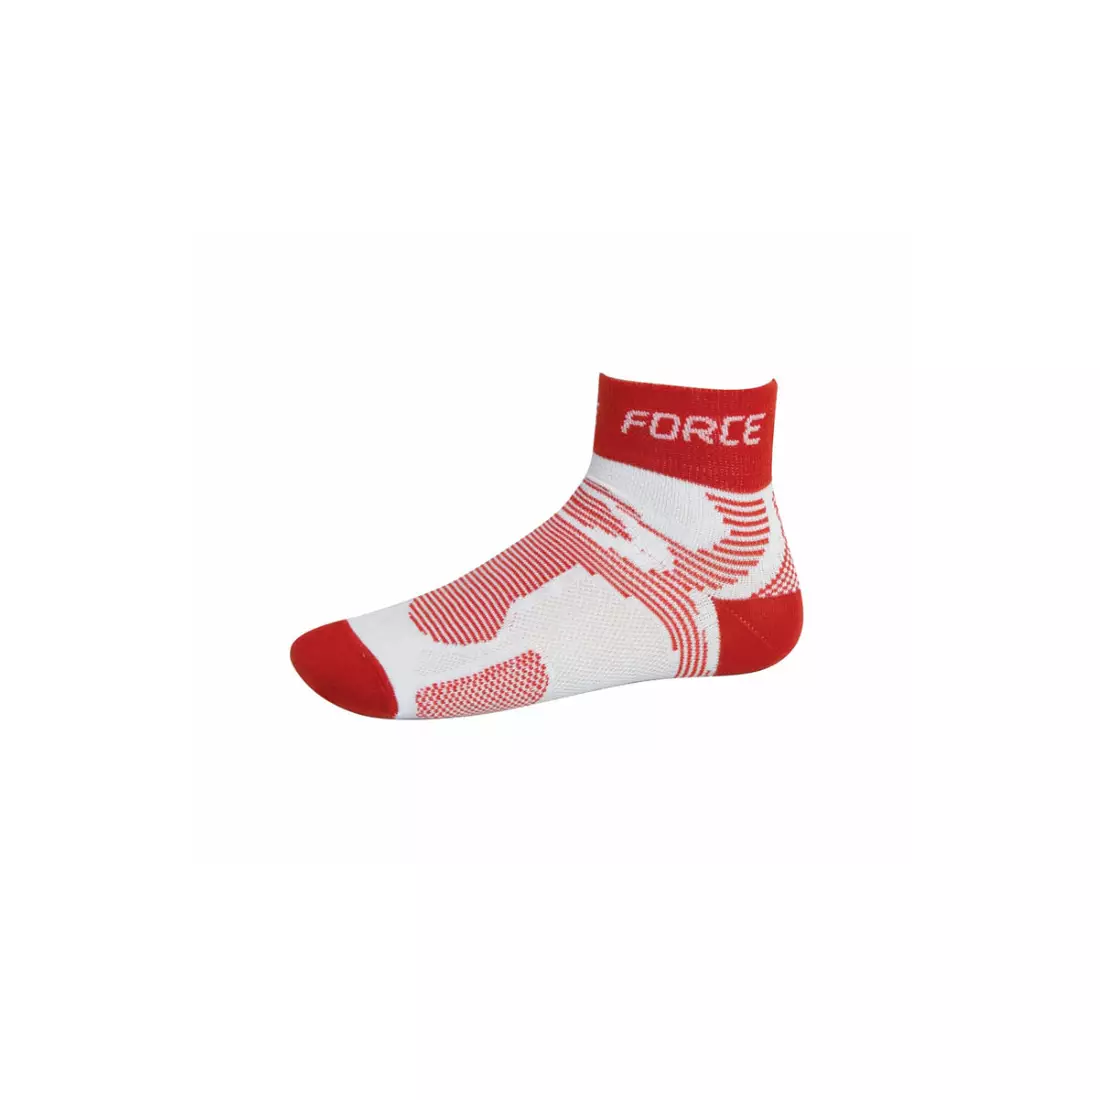 FORCE 2 COOLMAX sports socks 901024/901028 - white and red